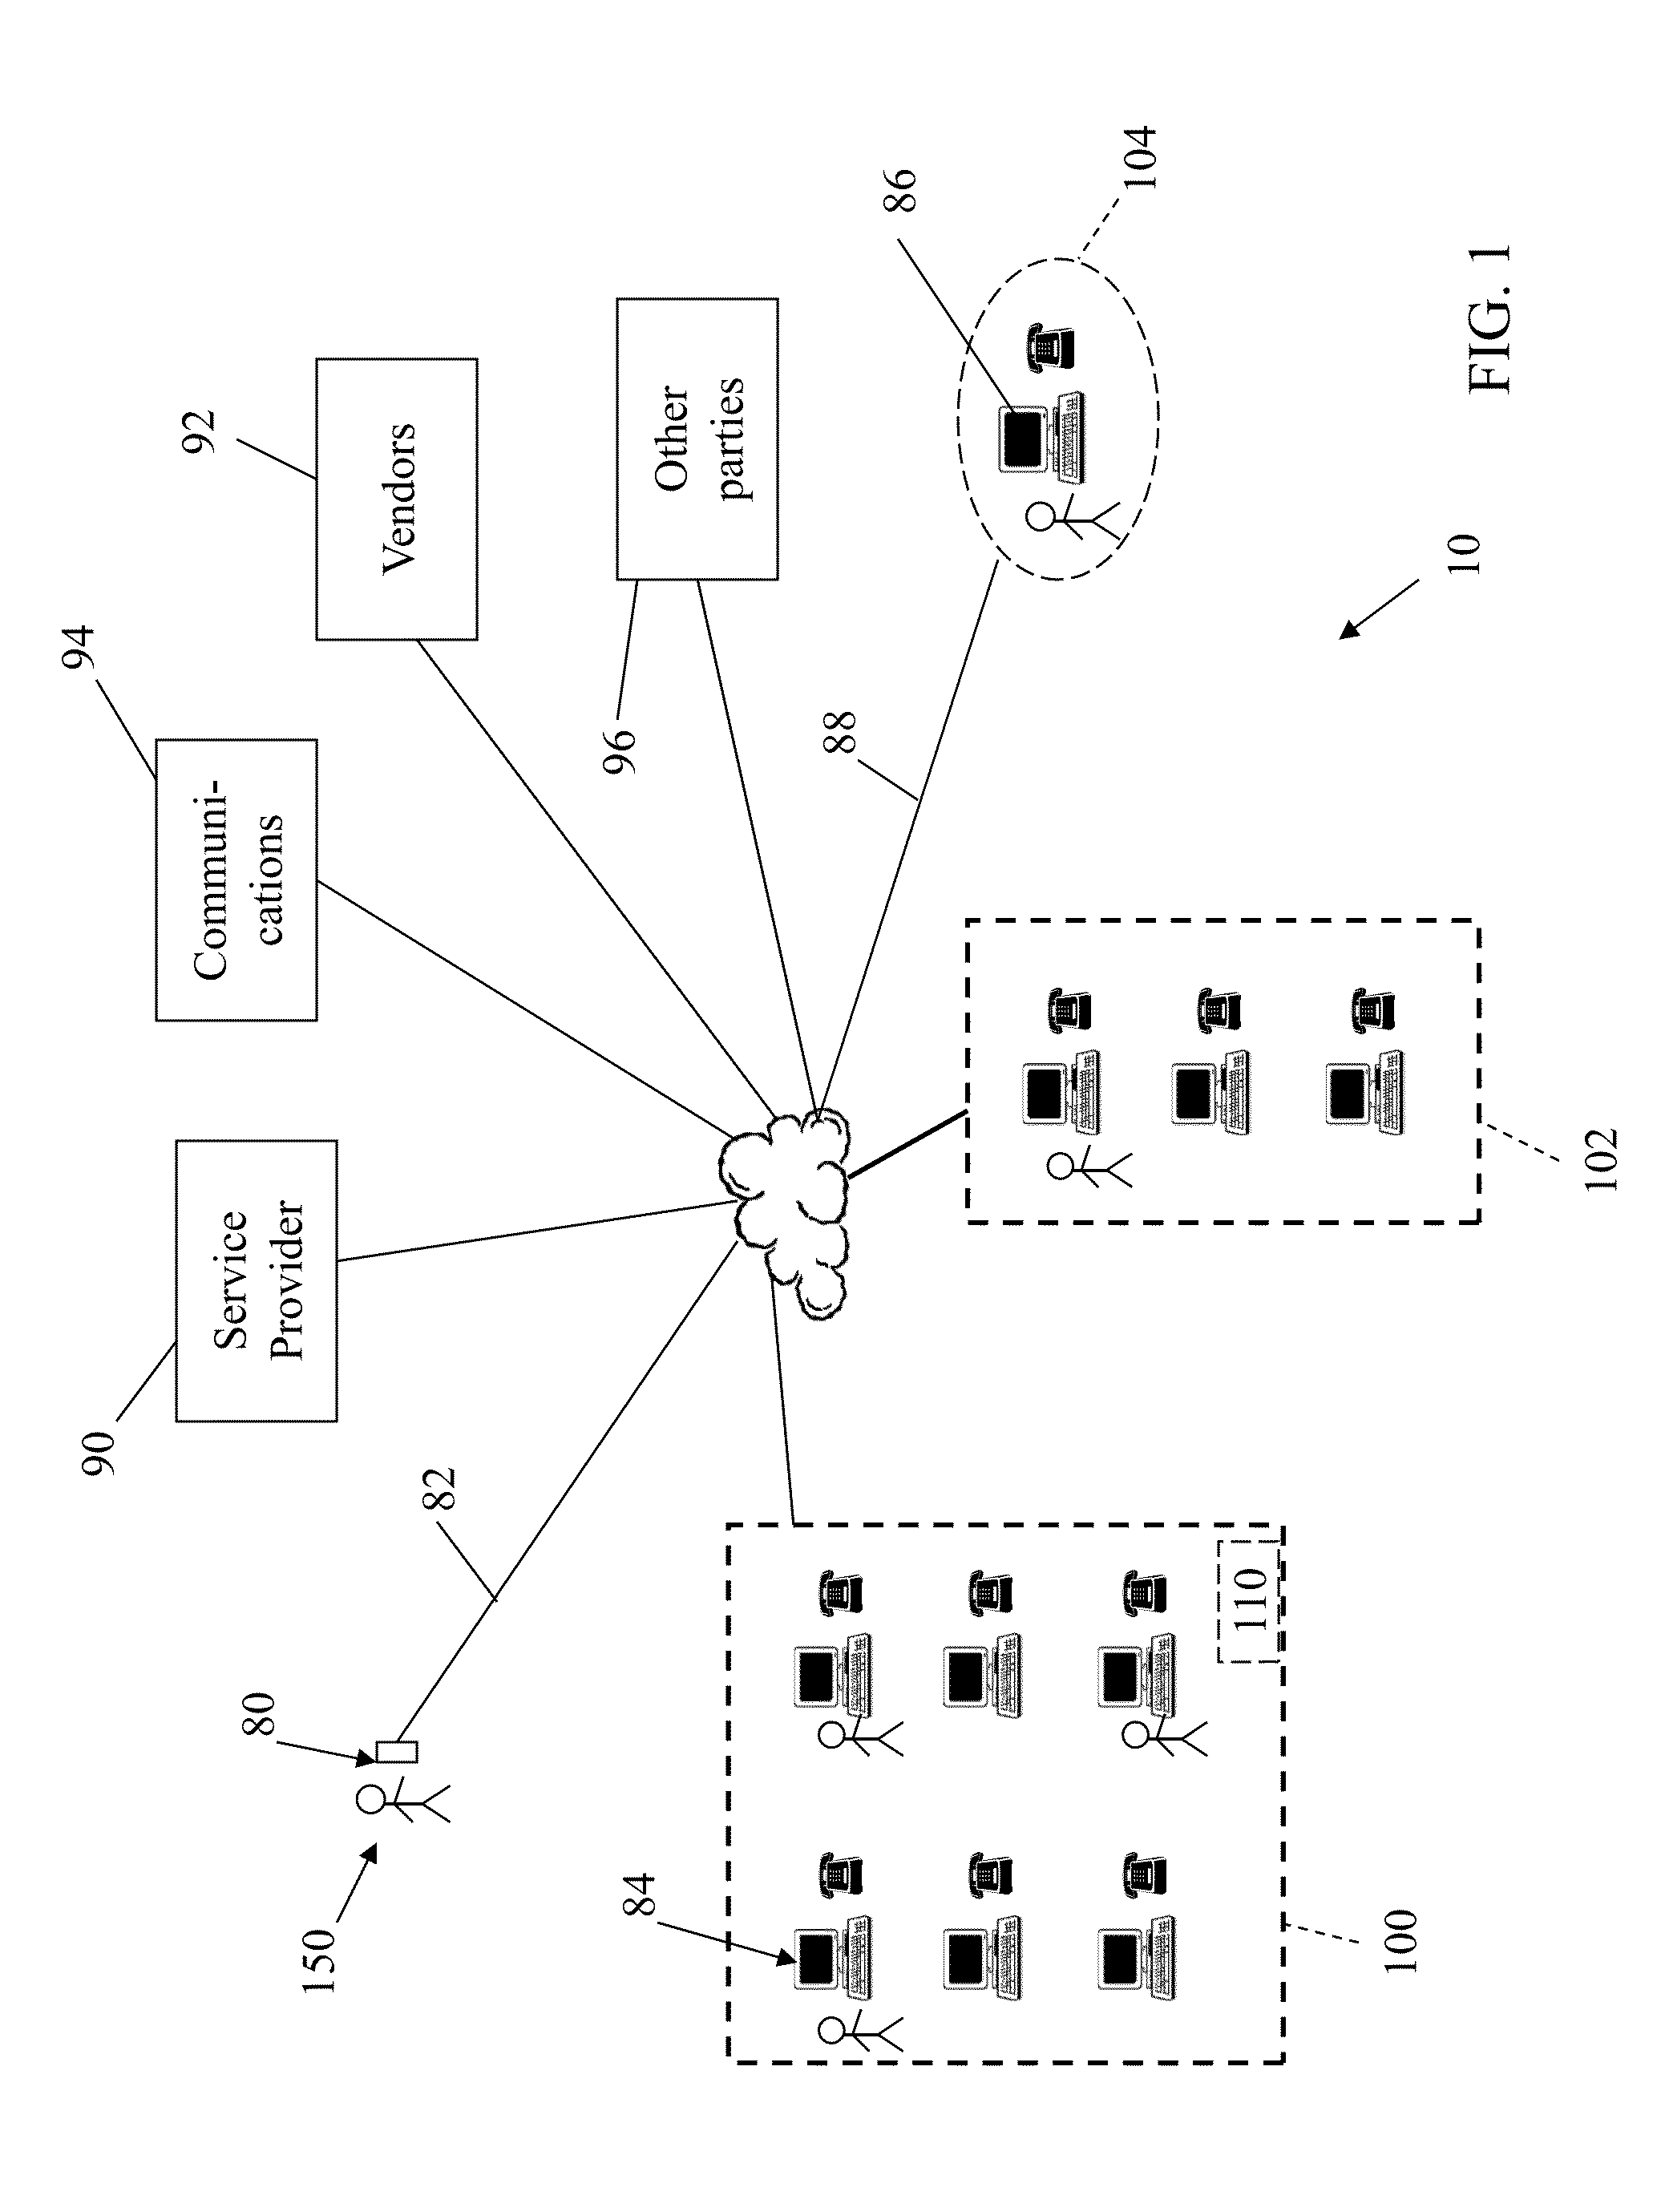 System and Method for Facilitating Workplace Utilization and Occupancy Management Using Mobile Devices